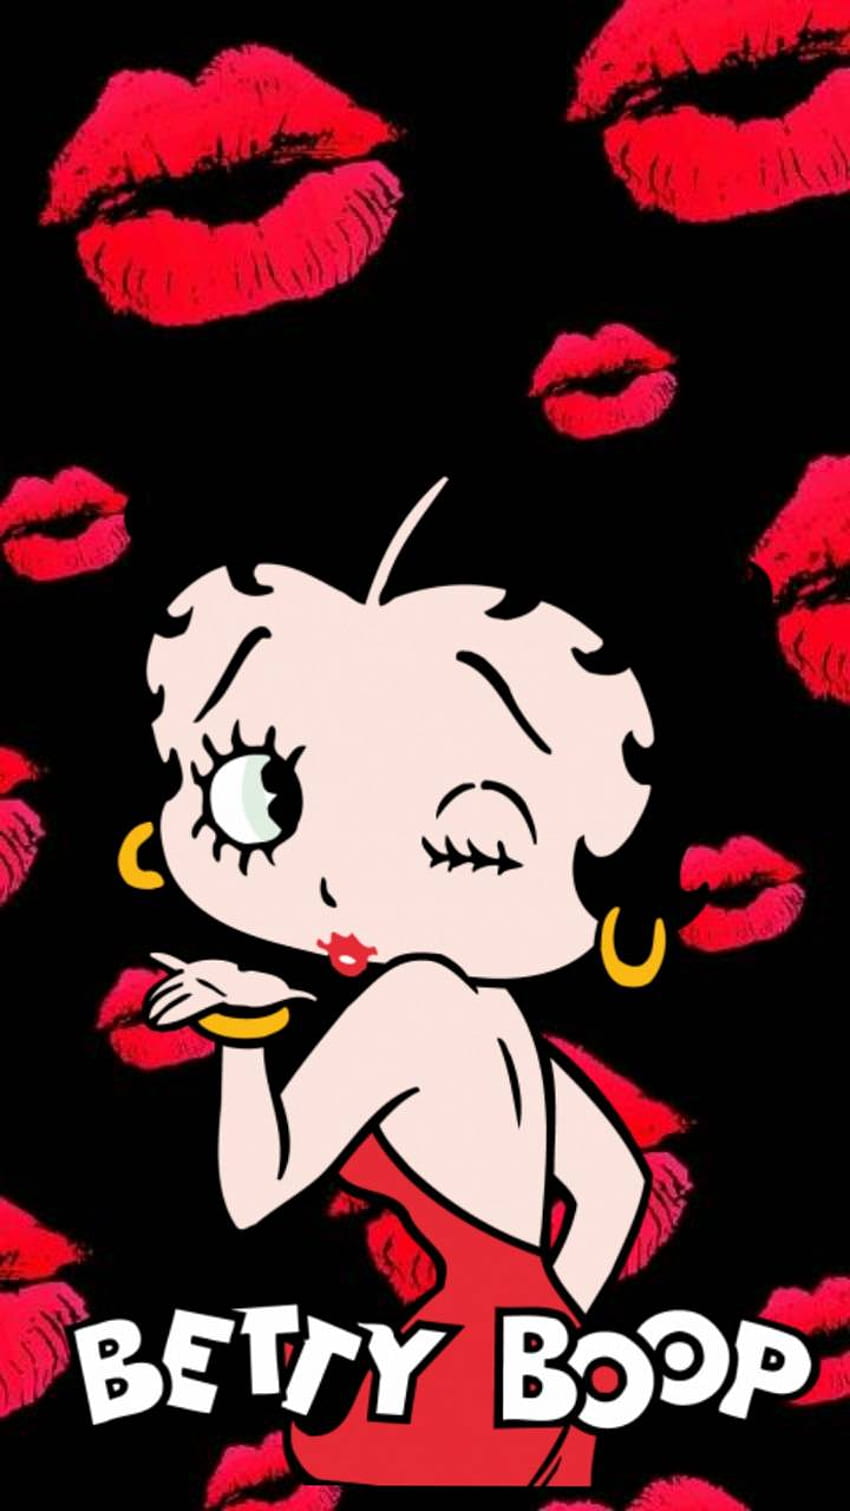 Betty Boop Wallpaper For Phone 41 images